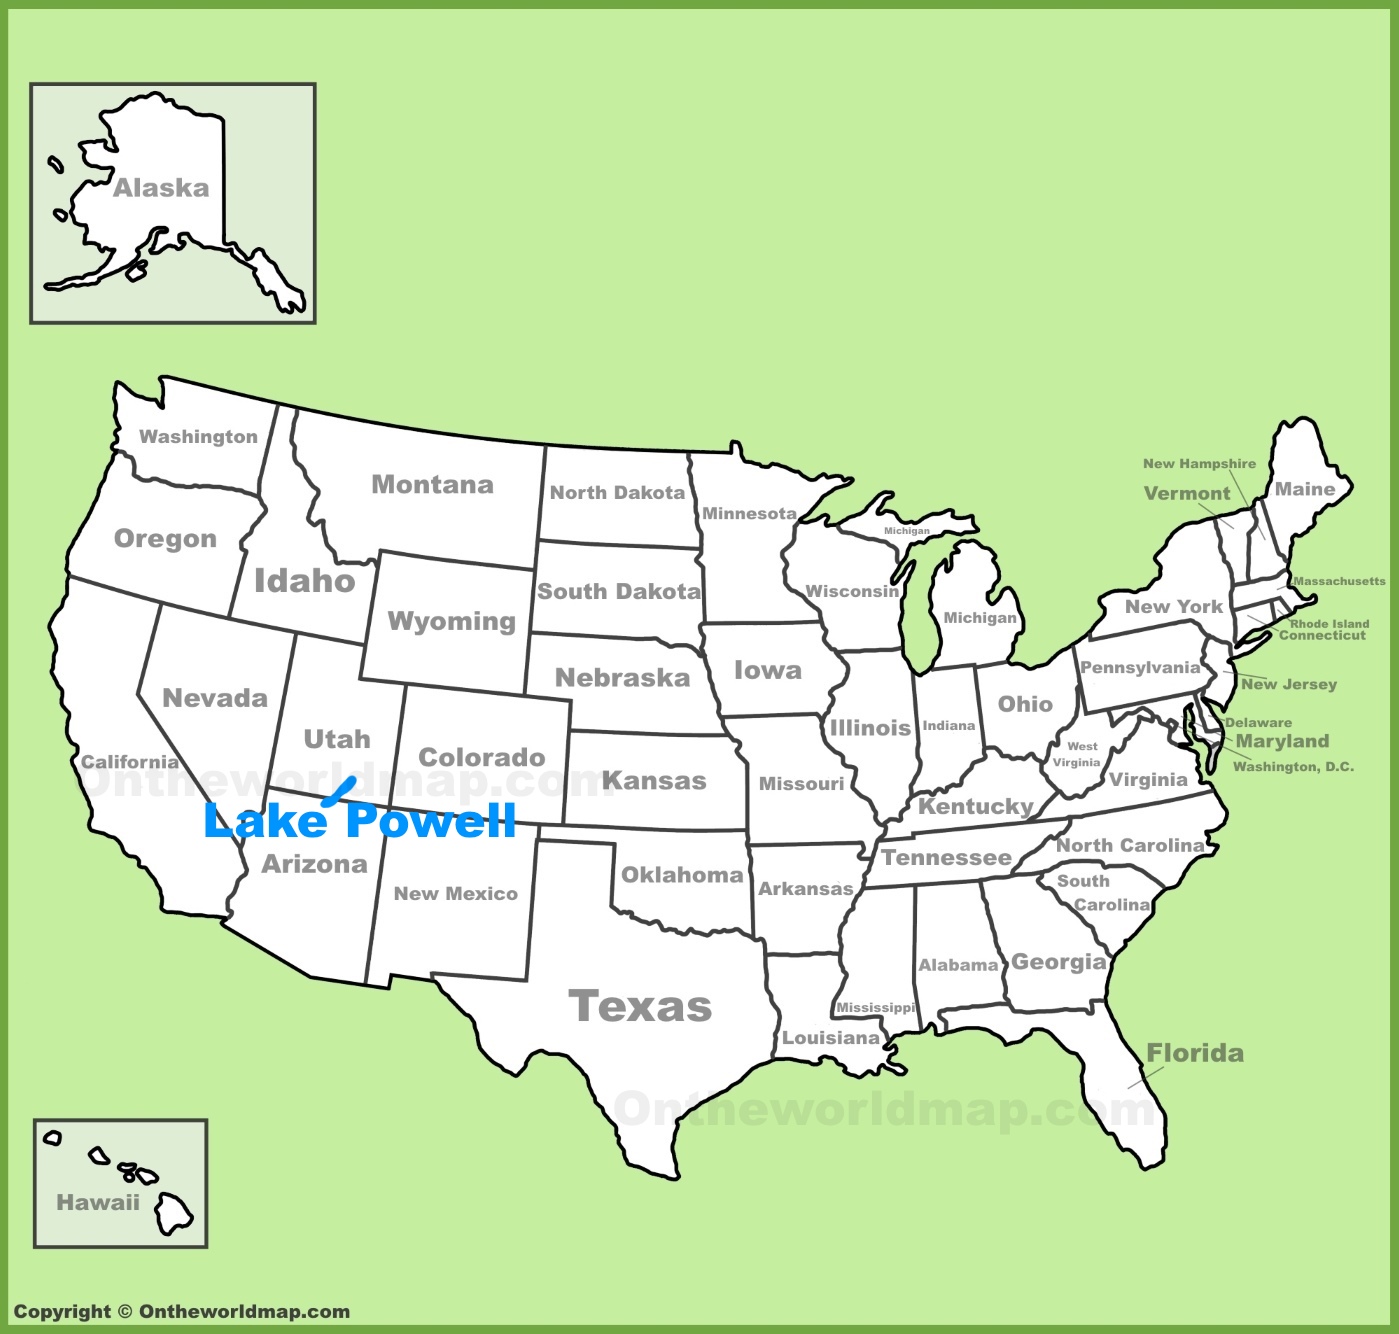 Lake Powell Location On The U S Map